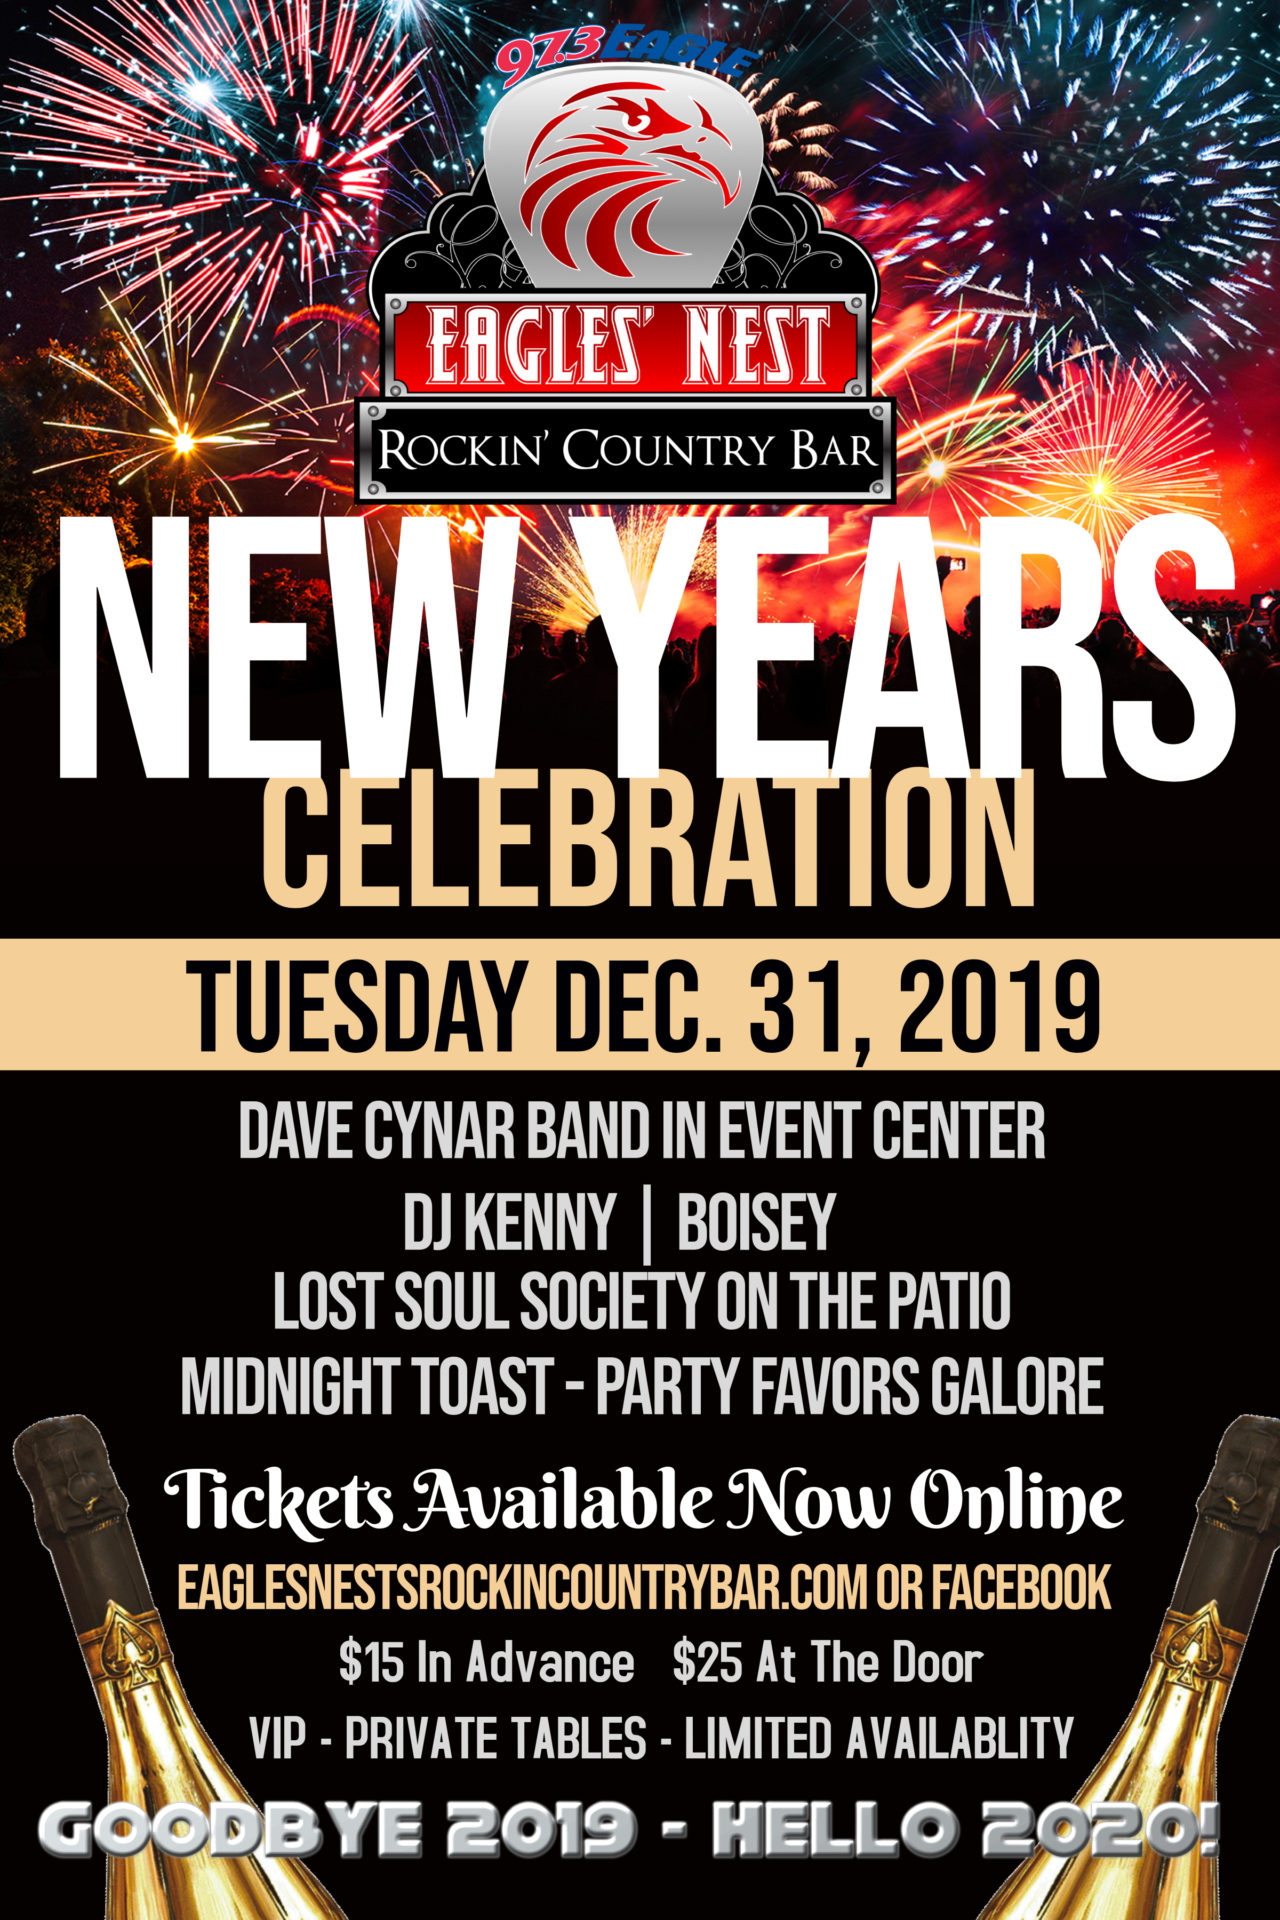 New Years Eve Party Eagles Nest Rockin Country Bar Chesapeake